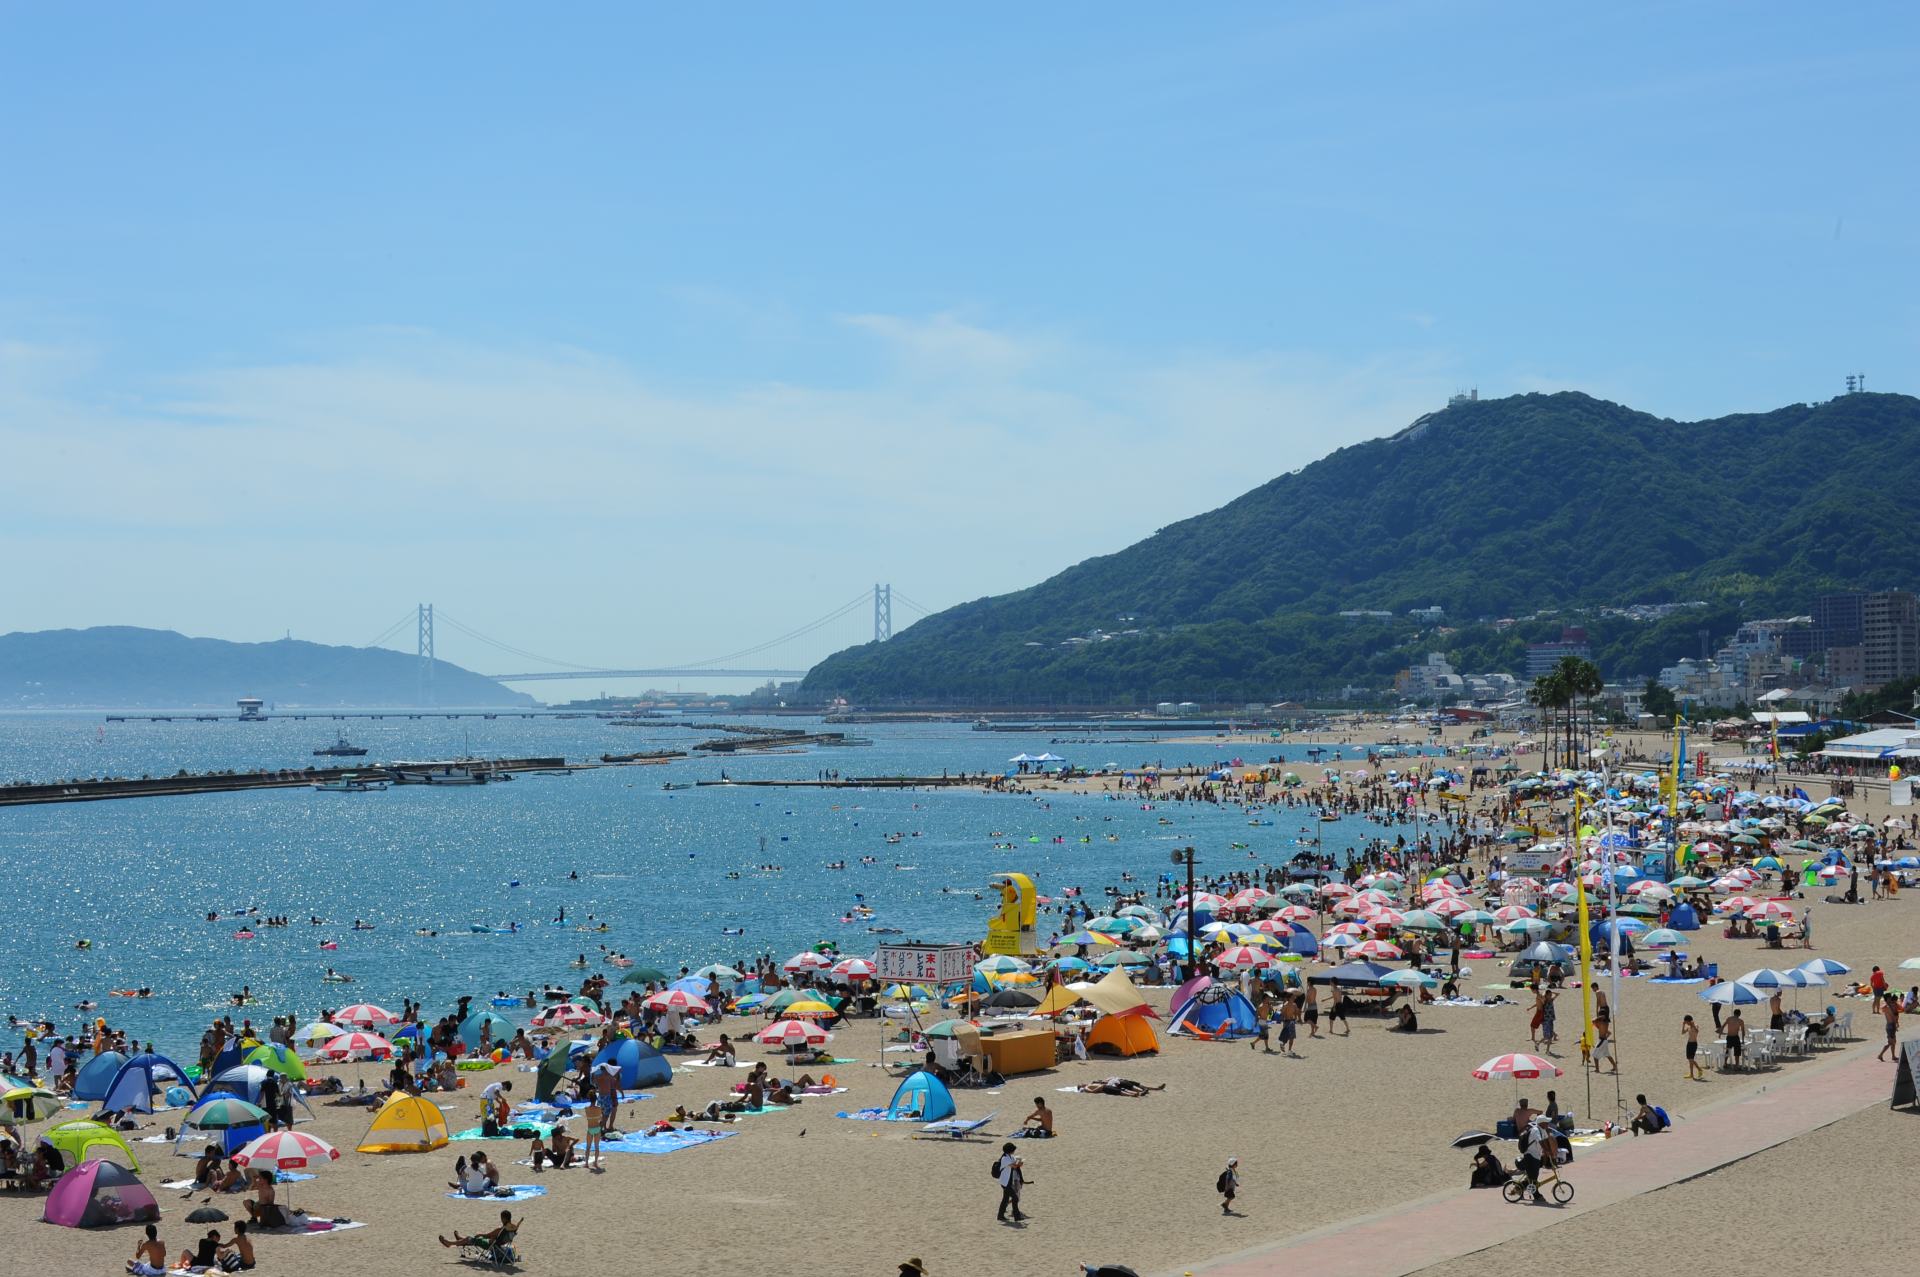 Akashi-Kaikyo Bridge can be seen by swimmers gathered at Suma Seaside Park in the summer.